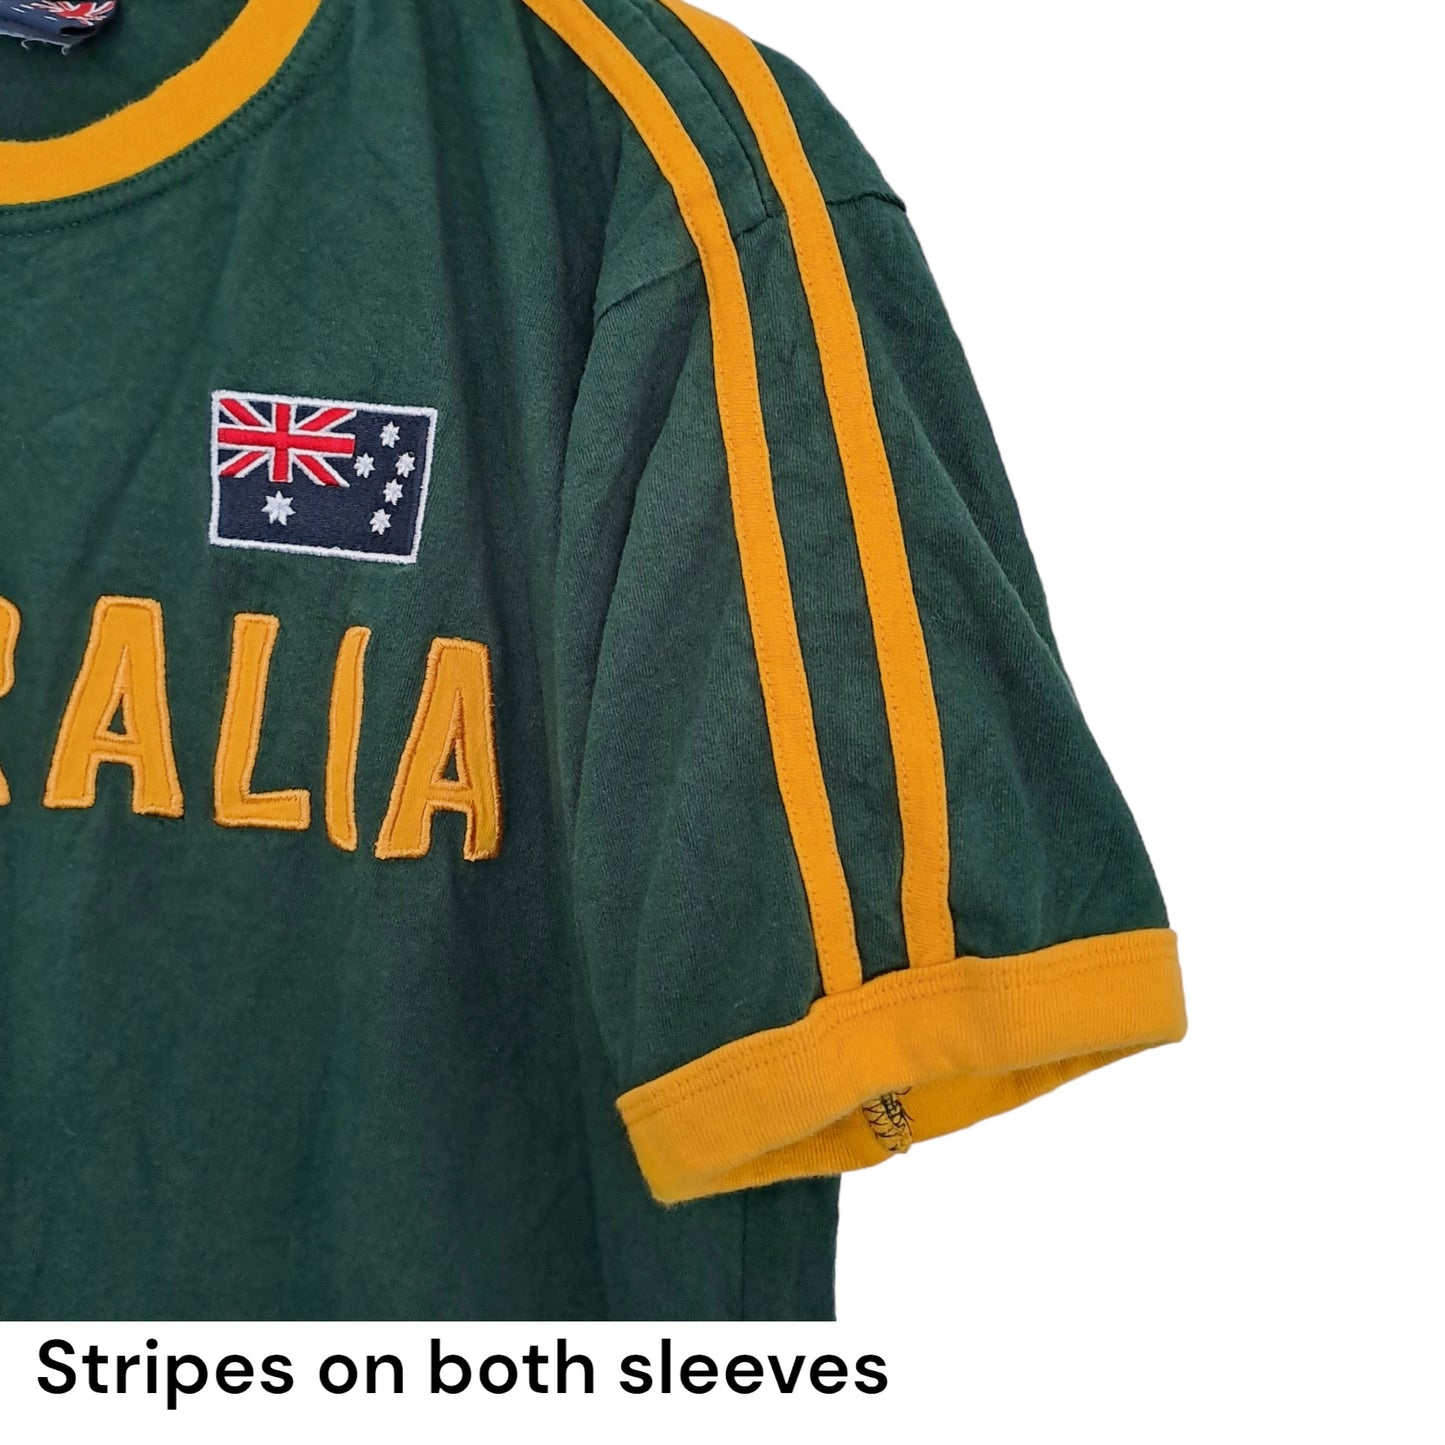 SOLD OUT | Australia T-shirt